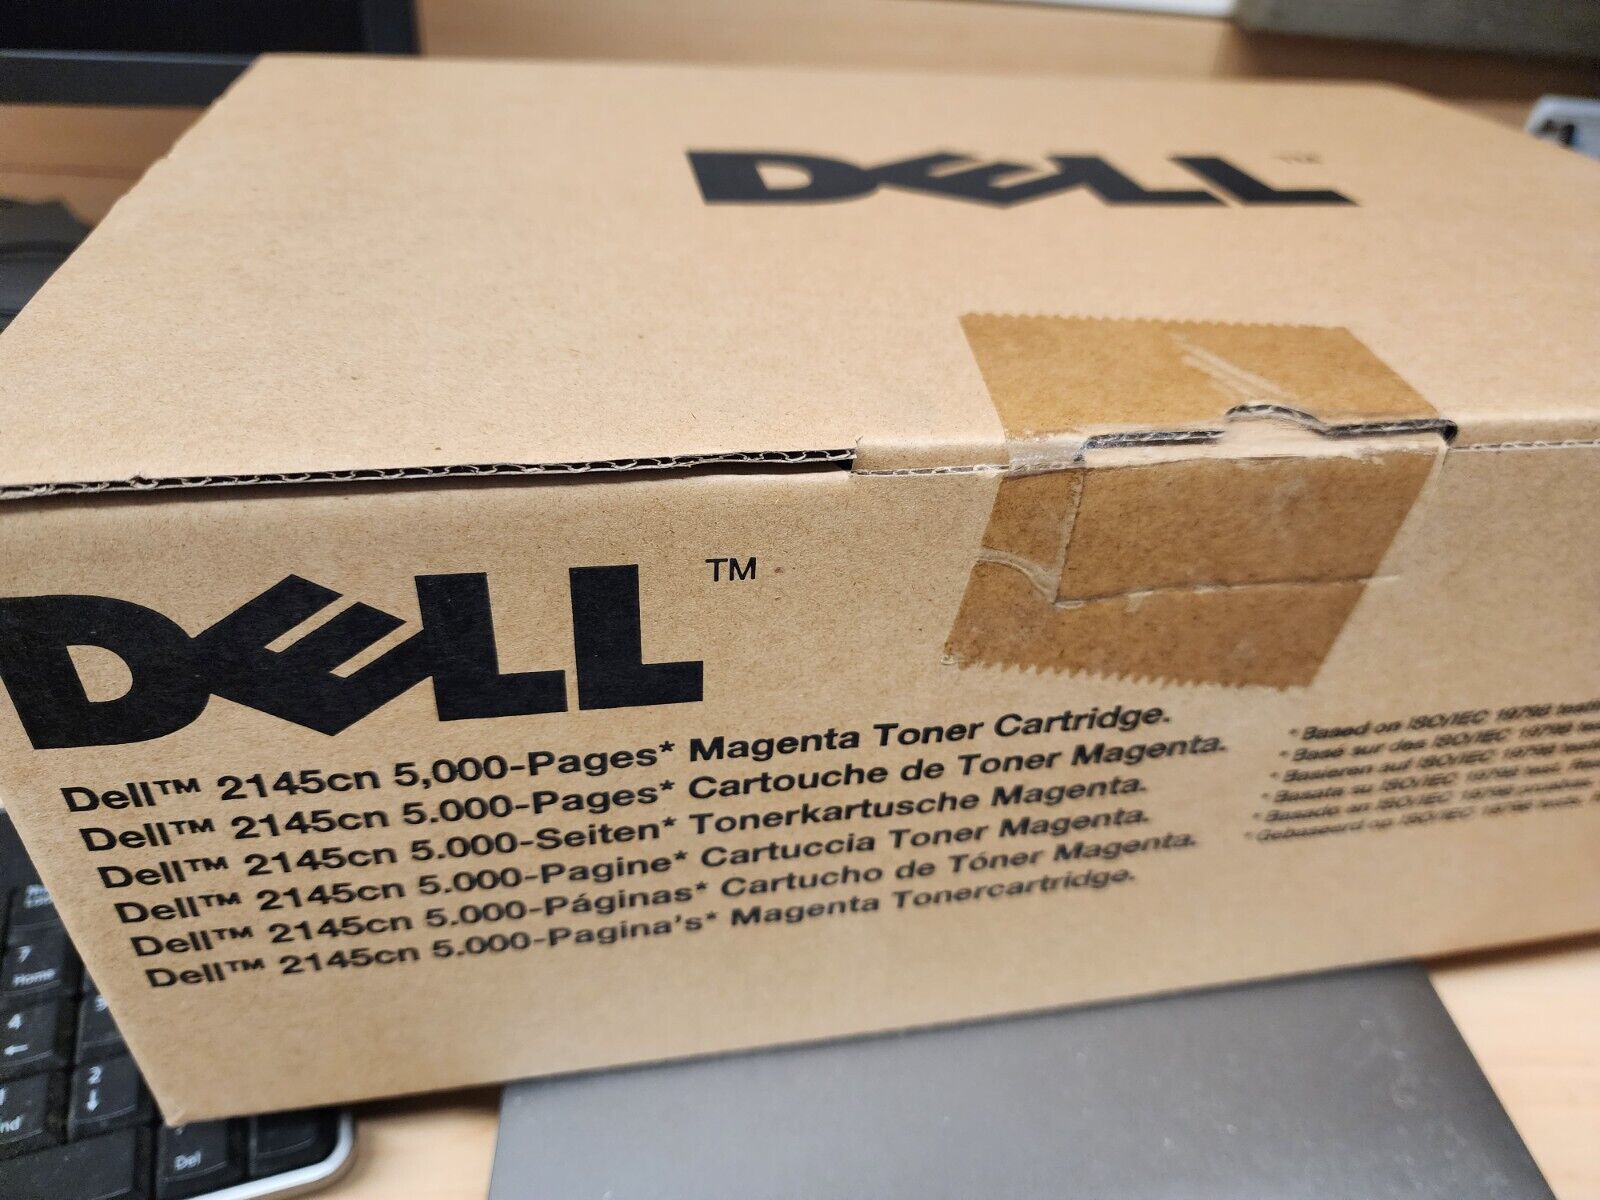 NEW Genuine Dell 2145cn 5,000-Pages* Magenta Toner Cartridge